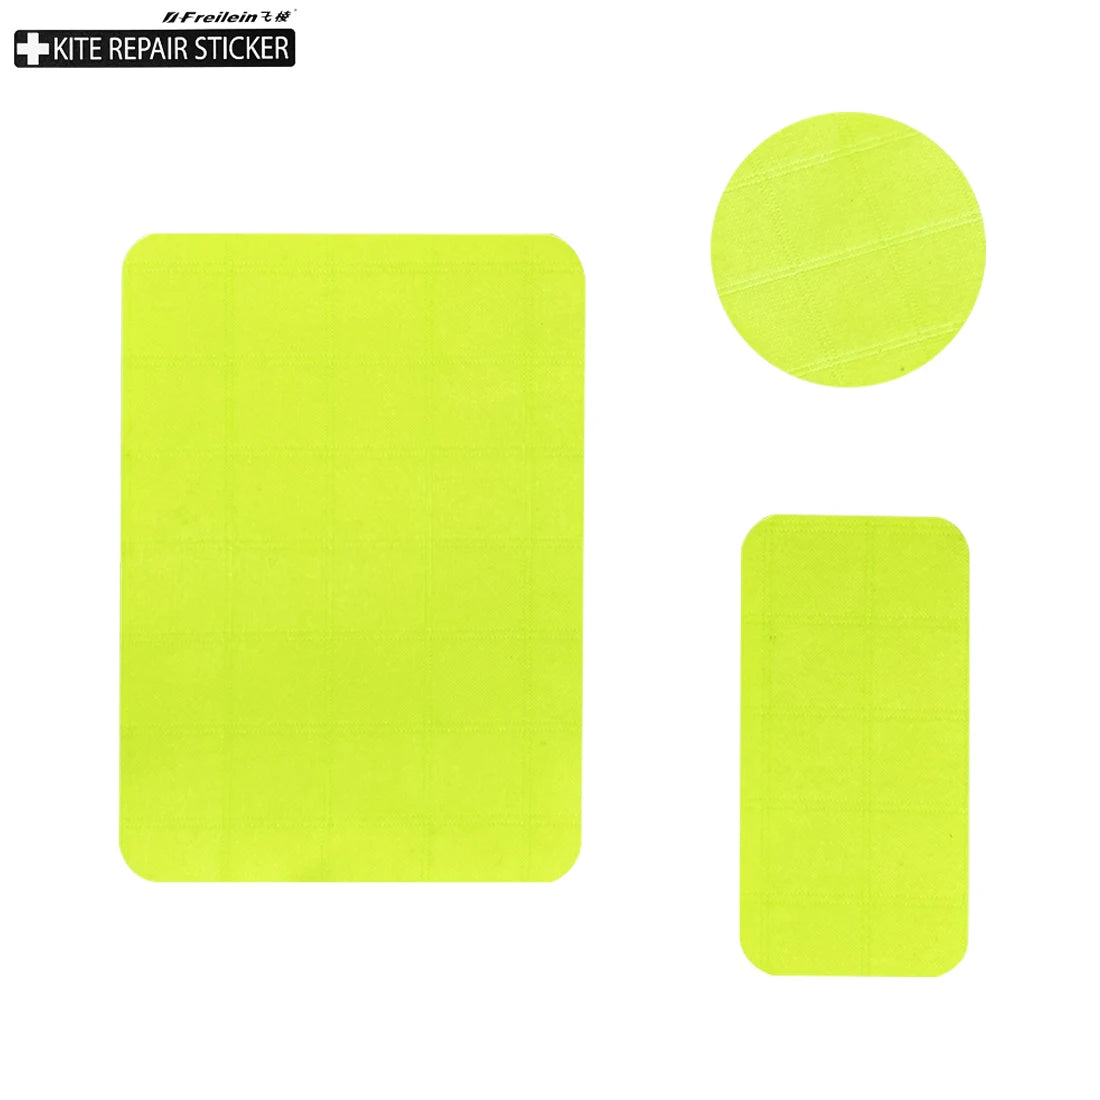 2pcs Freilein Ripstop Kite Repair Sticker Patch Waterproof High Stickiness Translucent Back-up Tool Accessories 12 Colour